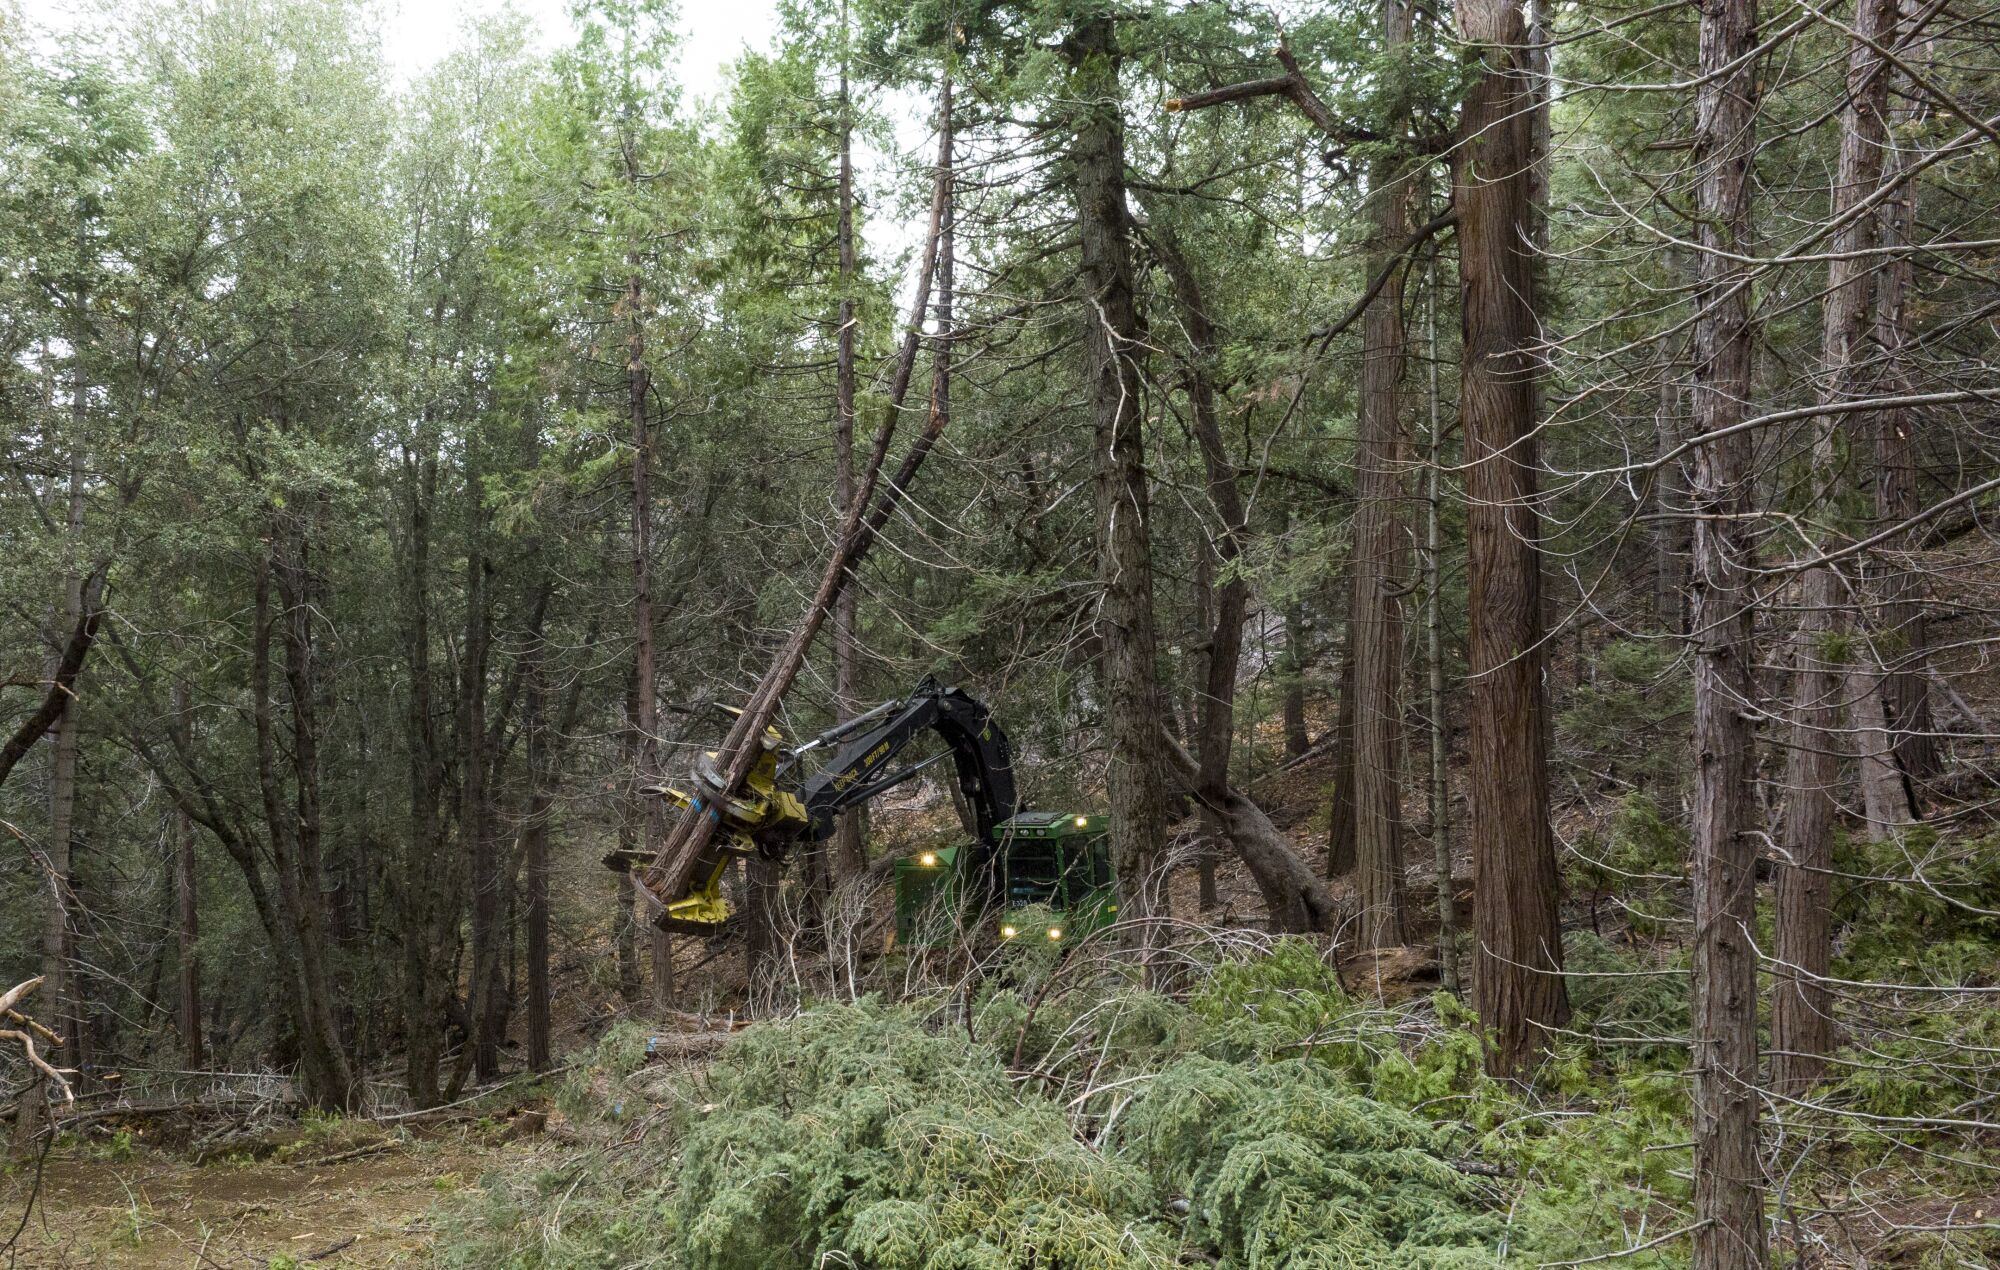 A feller buncher carries a tree that it cut and moves to place it in a pile.